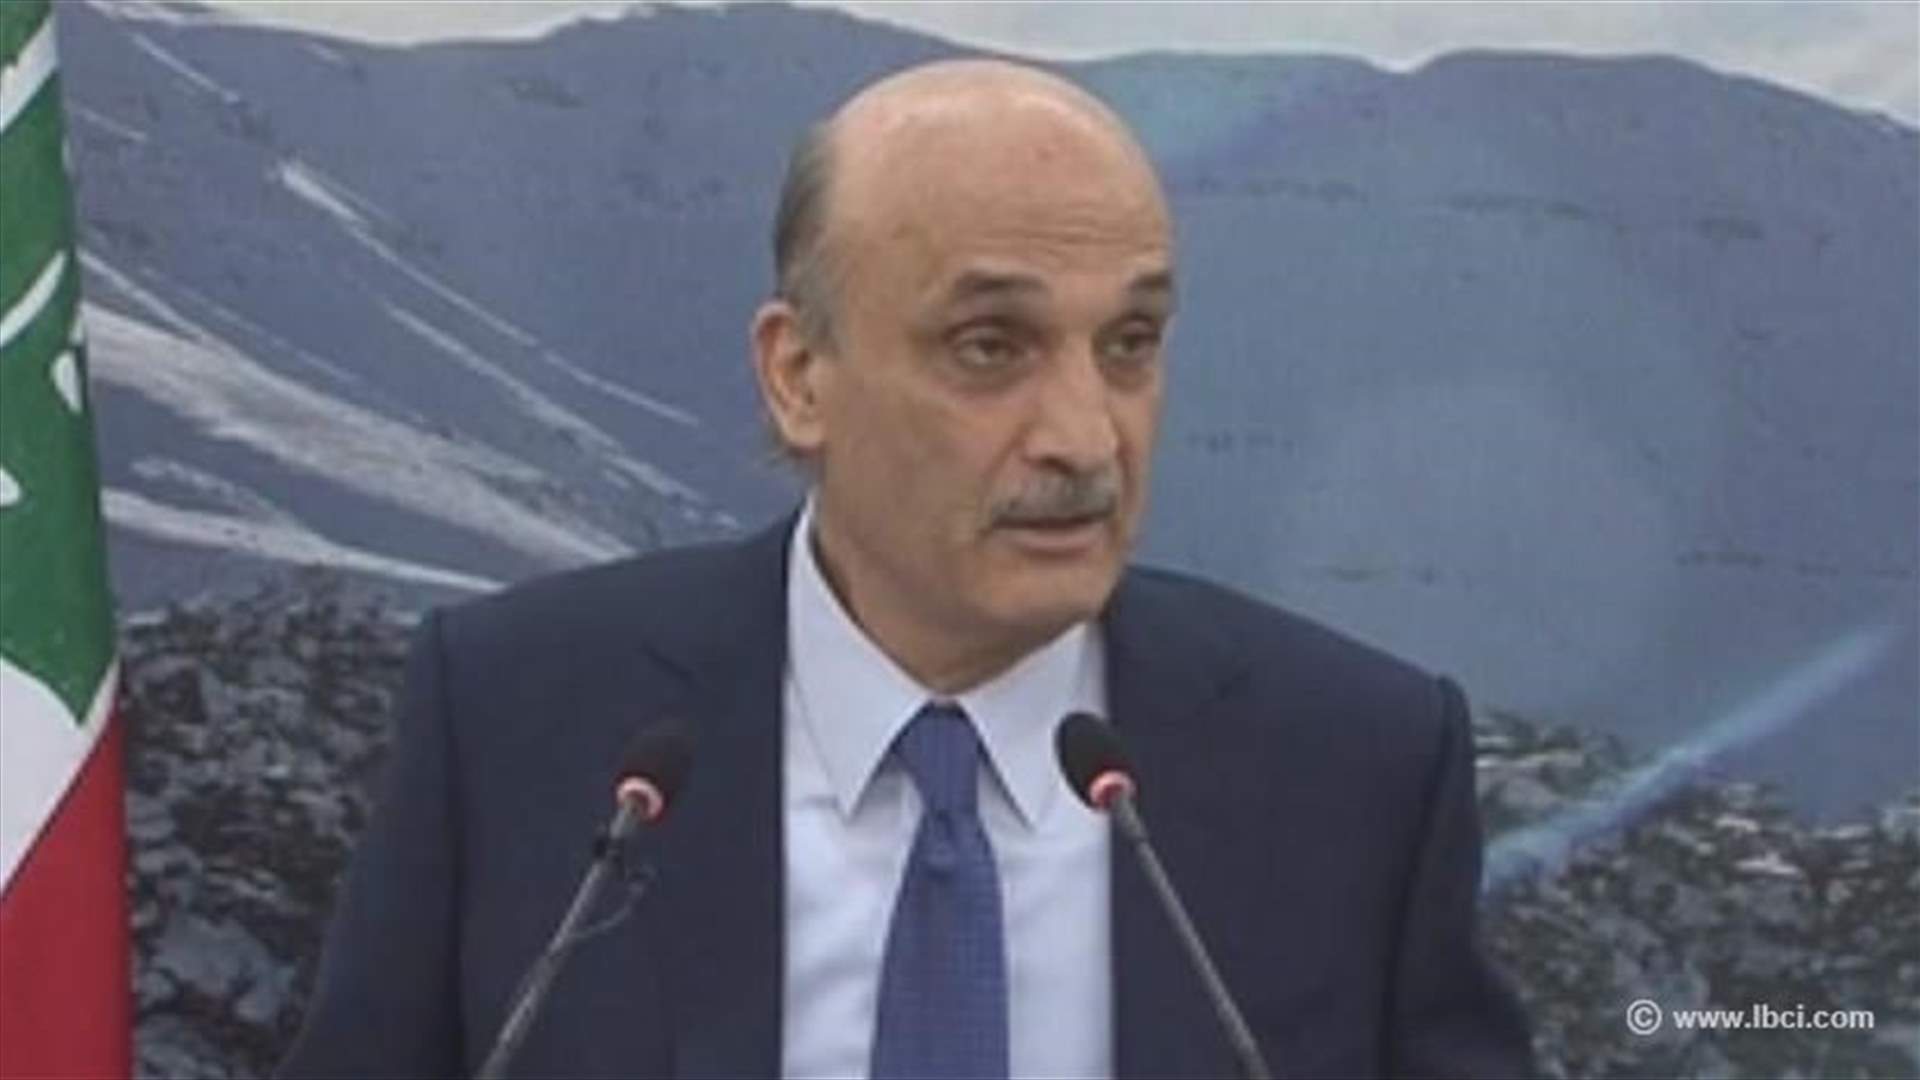 LF chief Geagea stresses need to end waste of public funds before imposing taxes